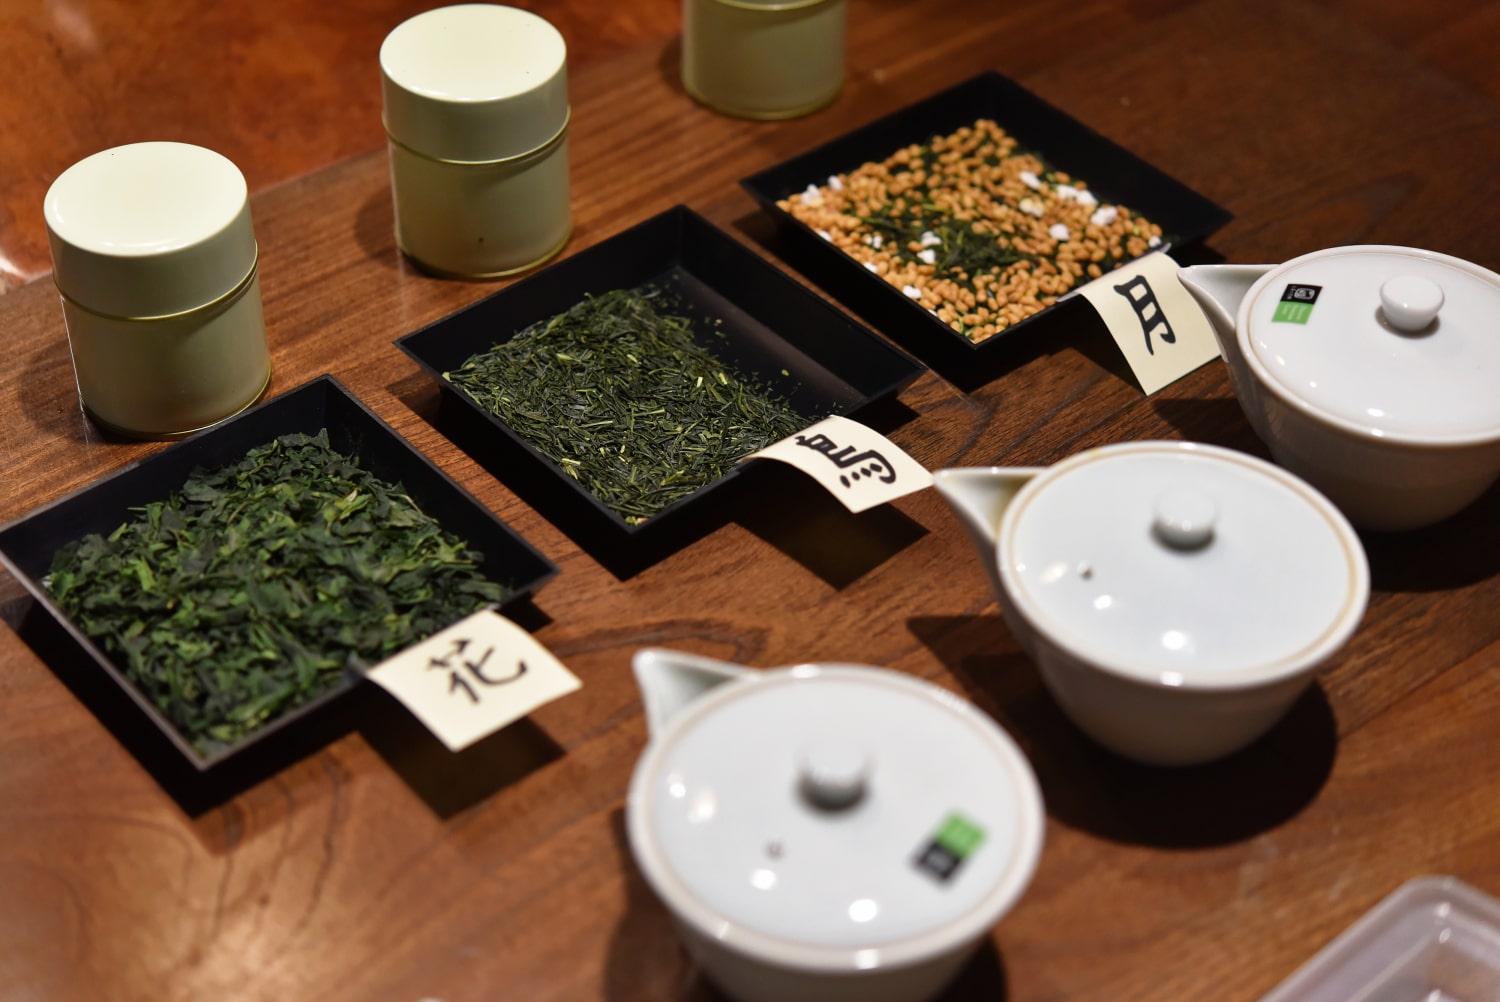 There are many kinds of tea, respectively named as flower, bird, moon, and so on.